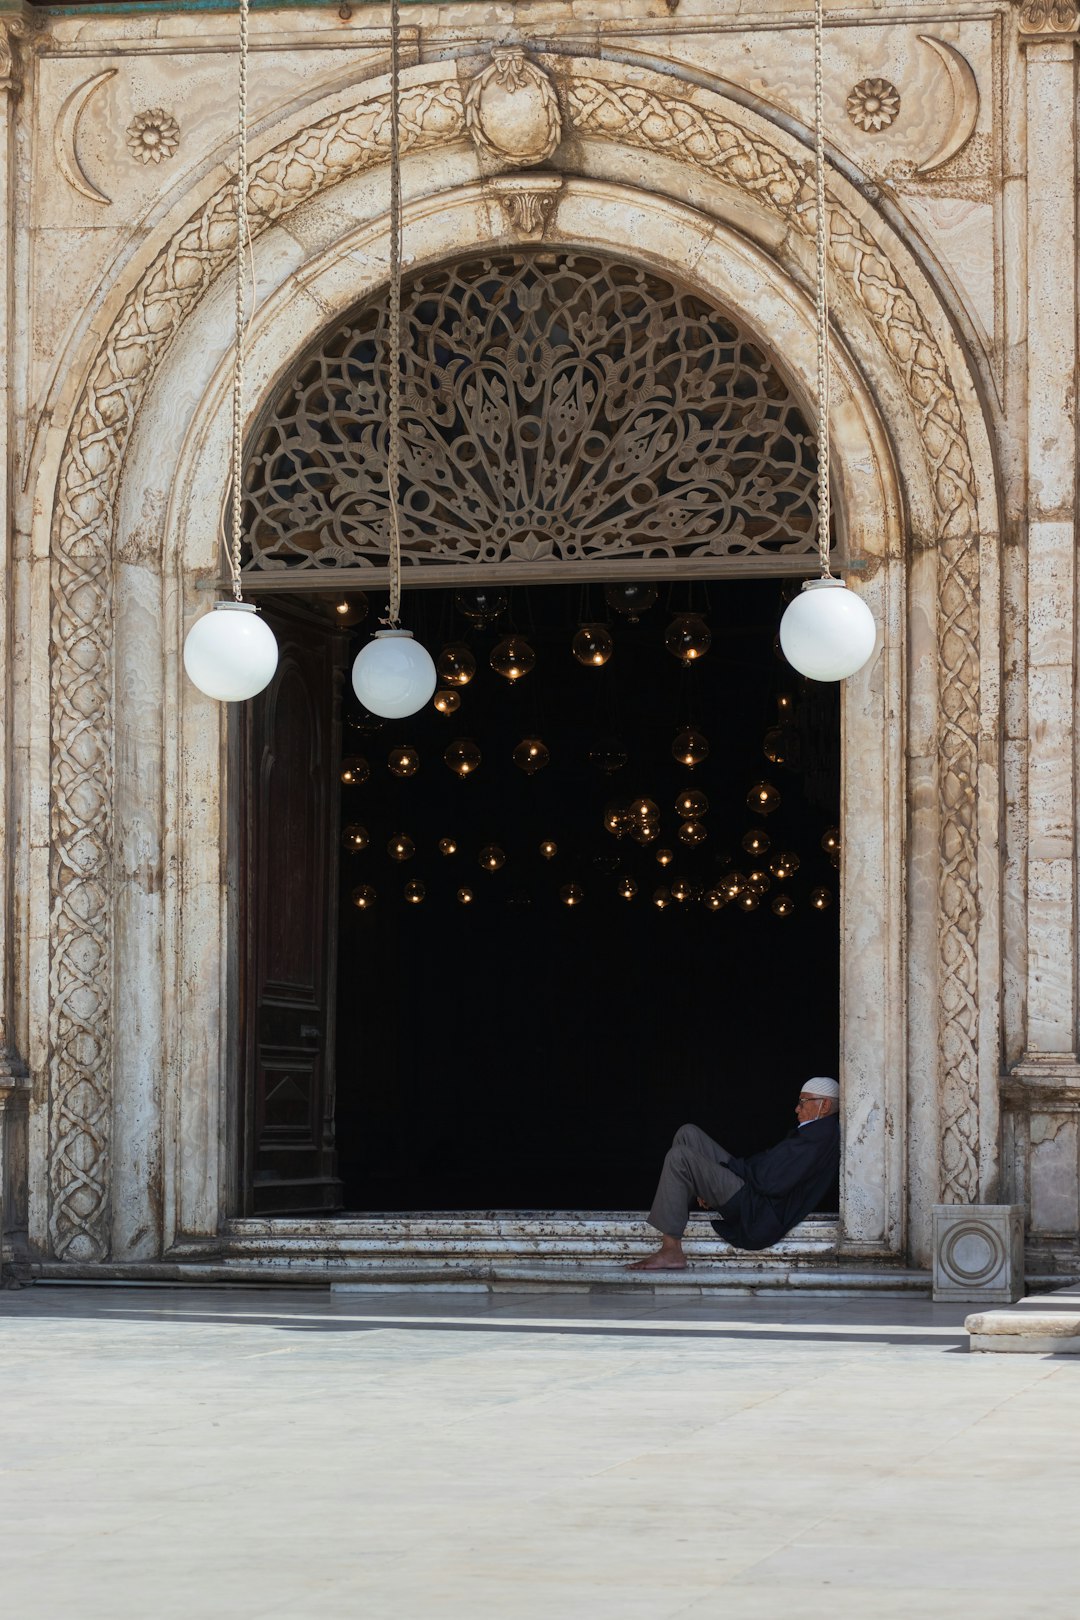 Mosque photo spot Cairo Mosque of Amr ibn al-As